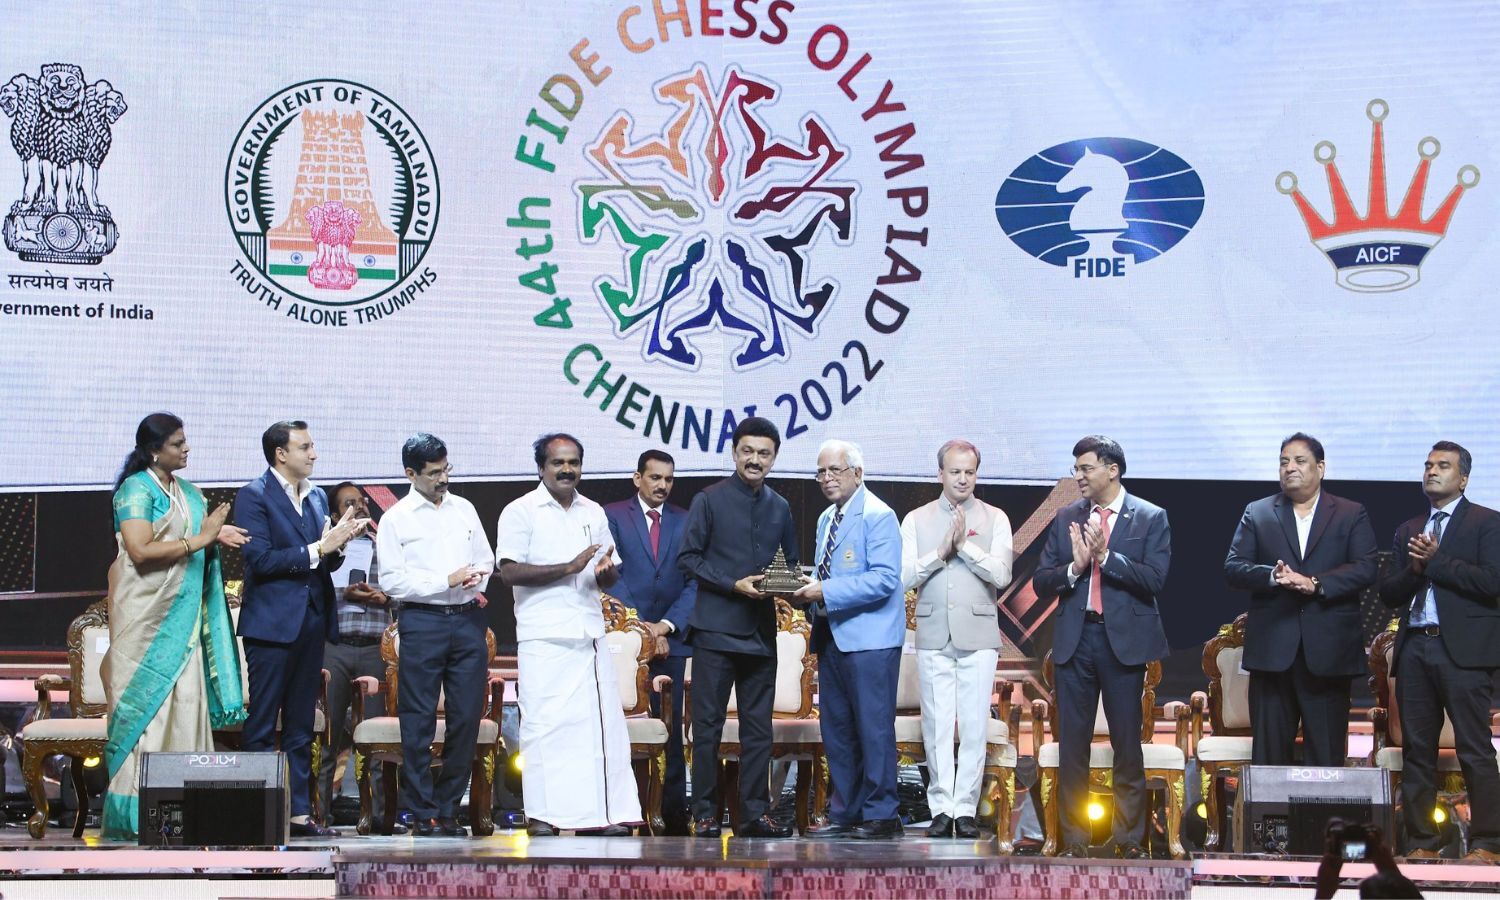 olympiad: Madras HC orders Tamil Nadu govt to publish photos of President,  PM in ads of Chess Olympiad - The Economic Times